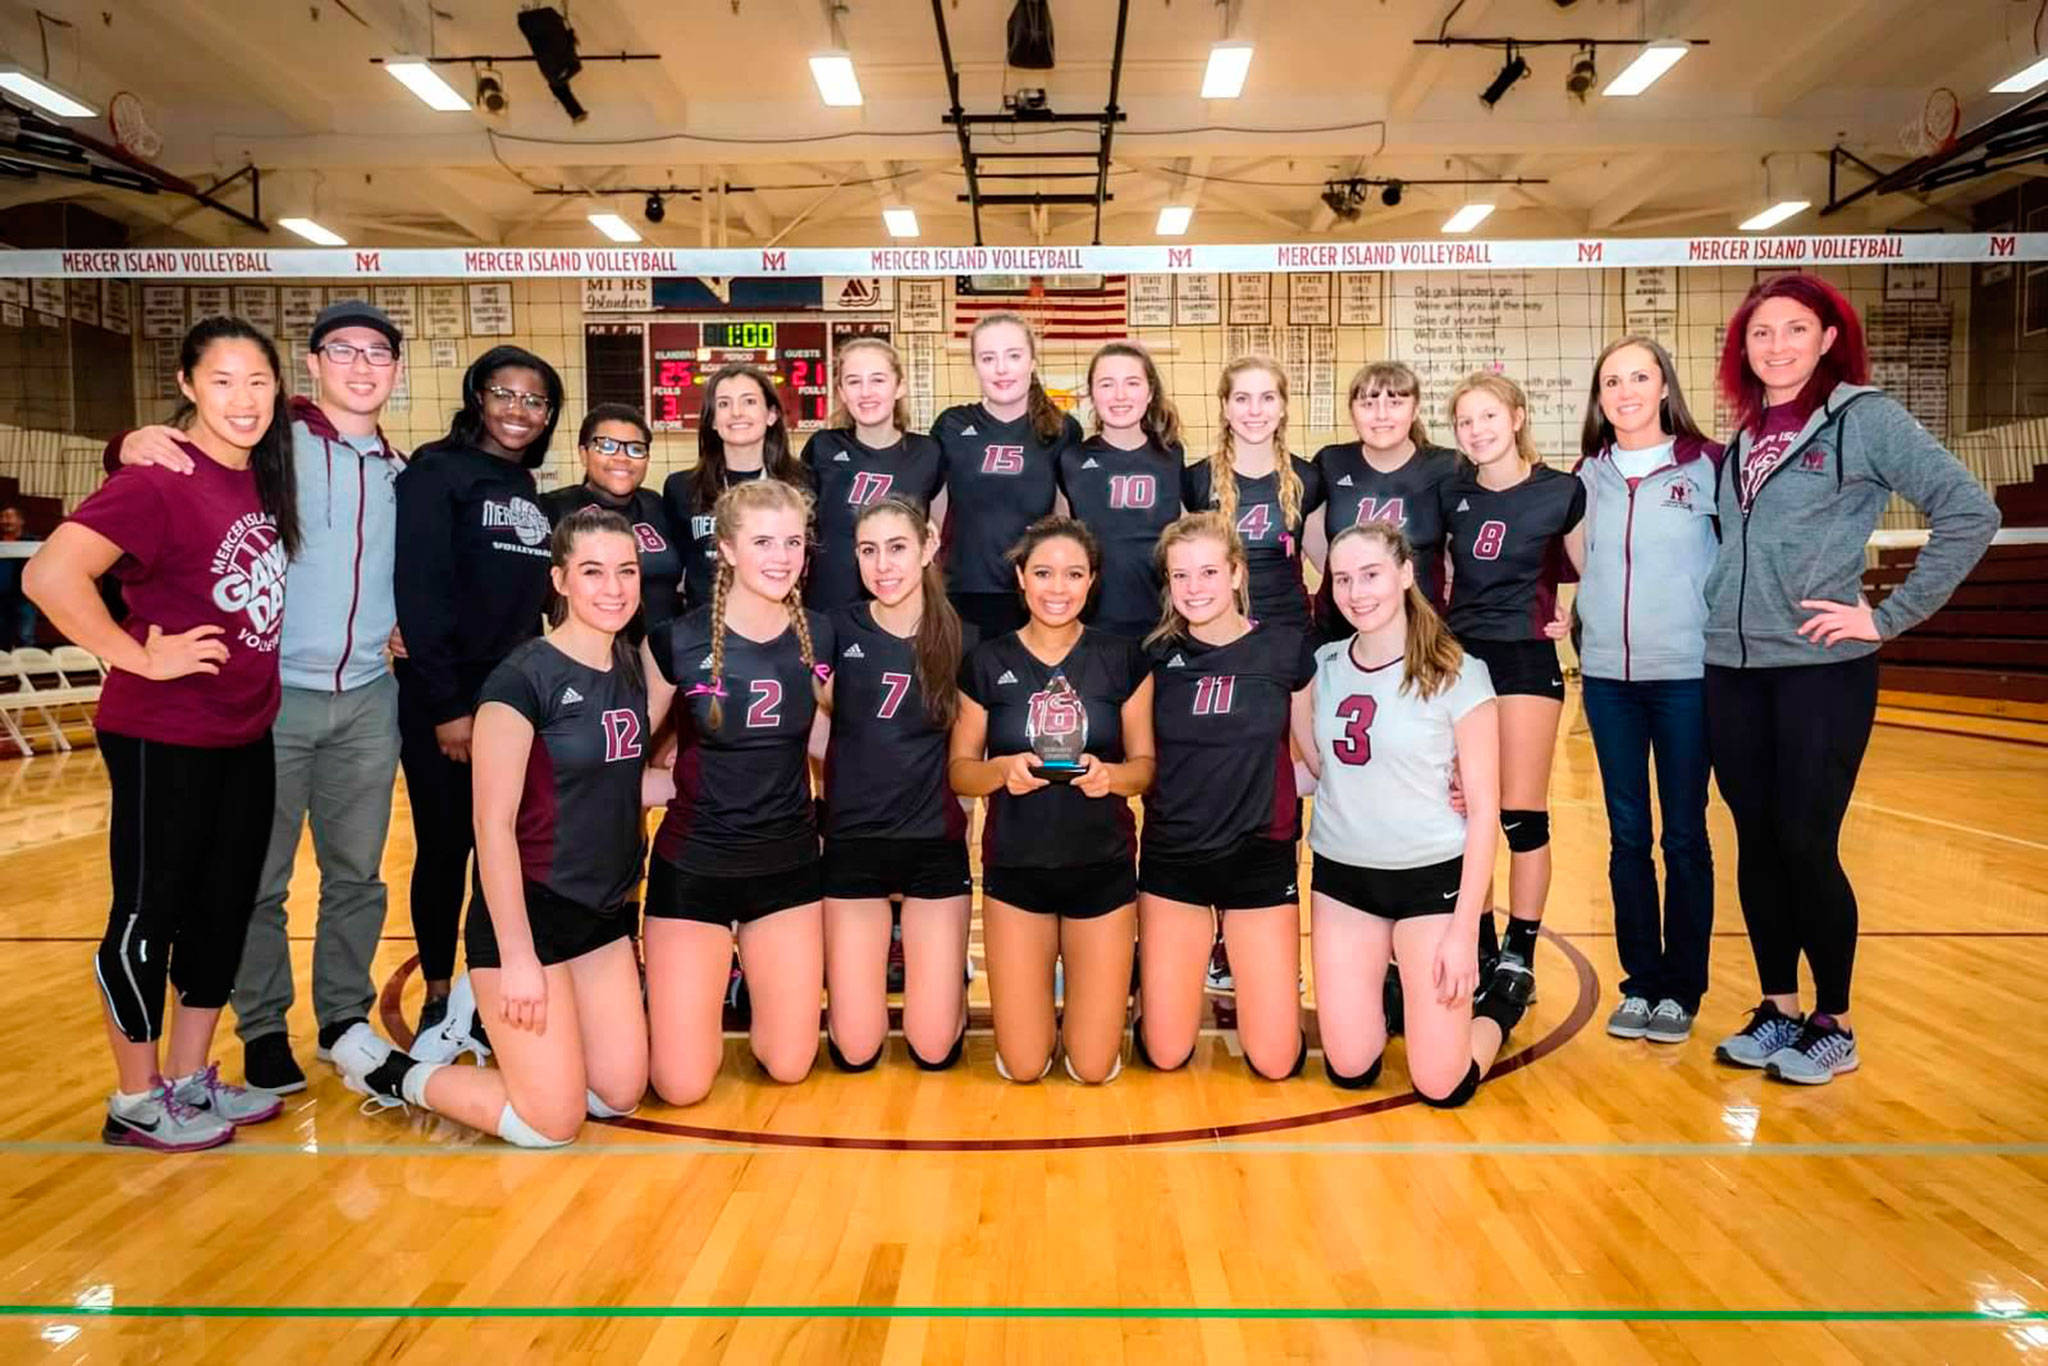 The MIHS girls volleyball team poses after winning the KingCo tournament on Oct. 28. The Islanders were undefeated in their league. Photo courtesy of Elise Quinn